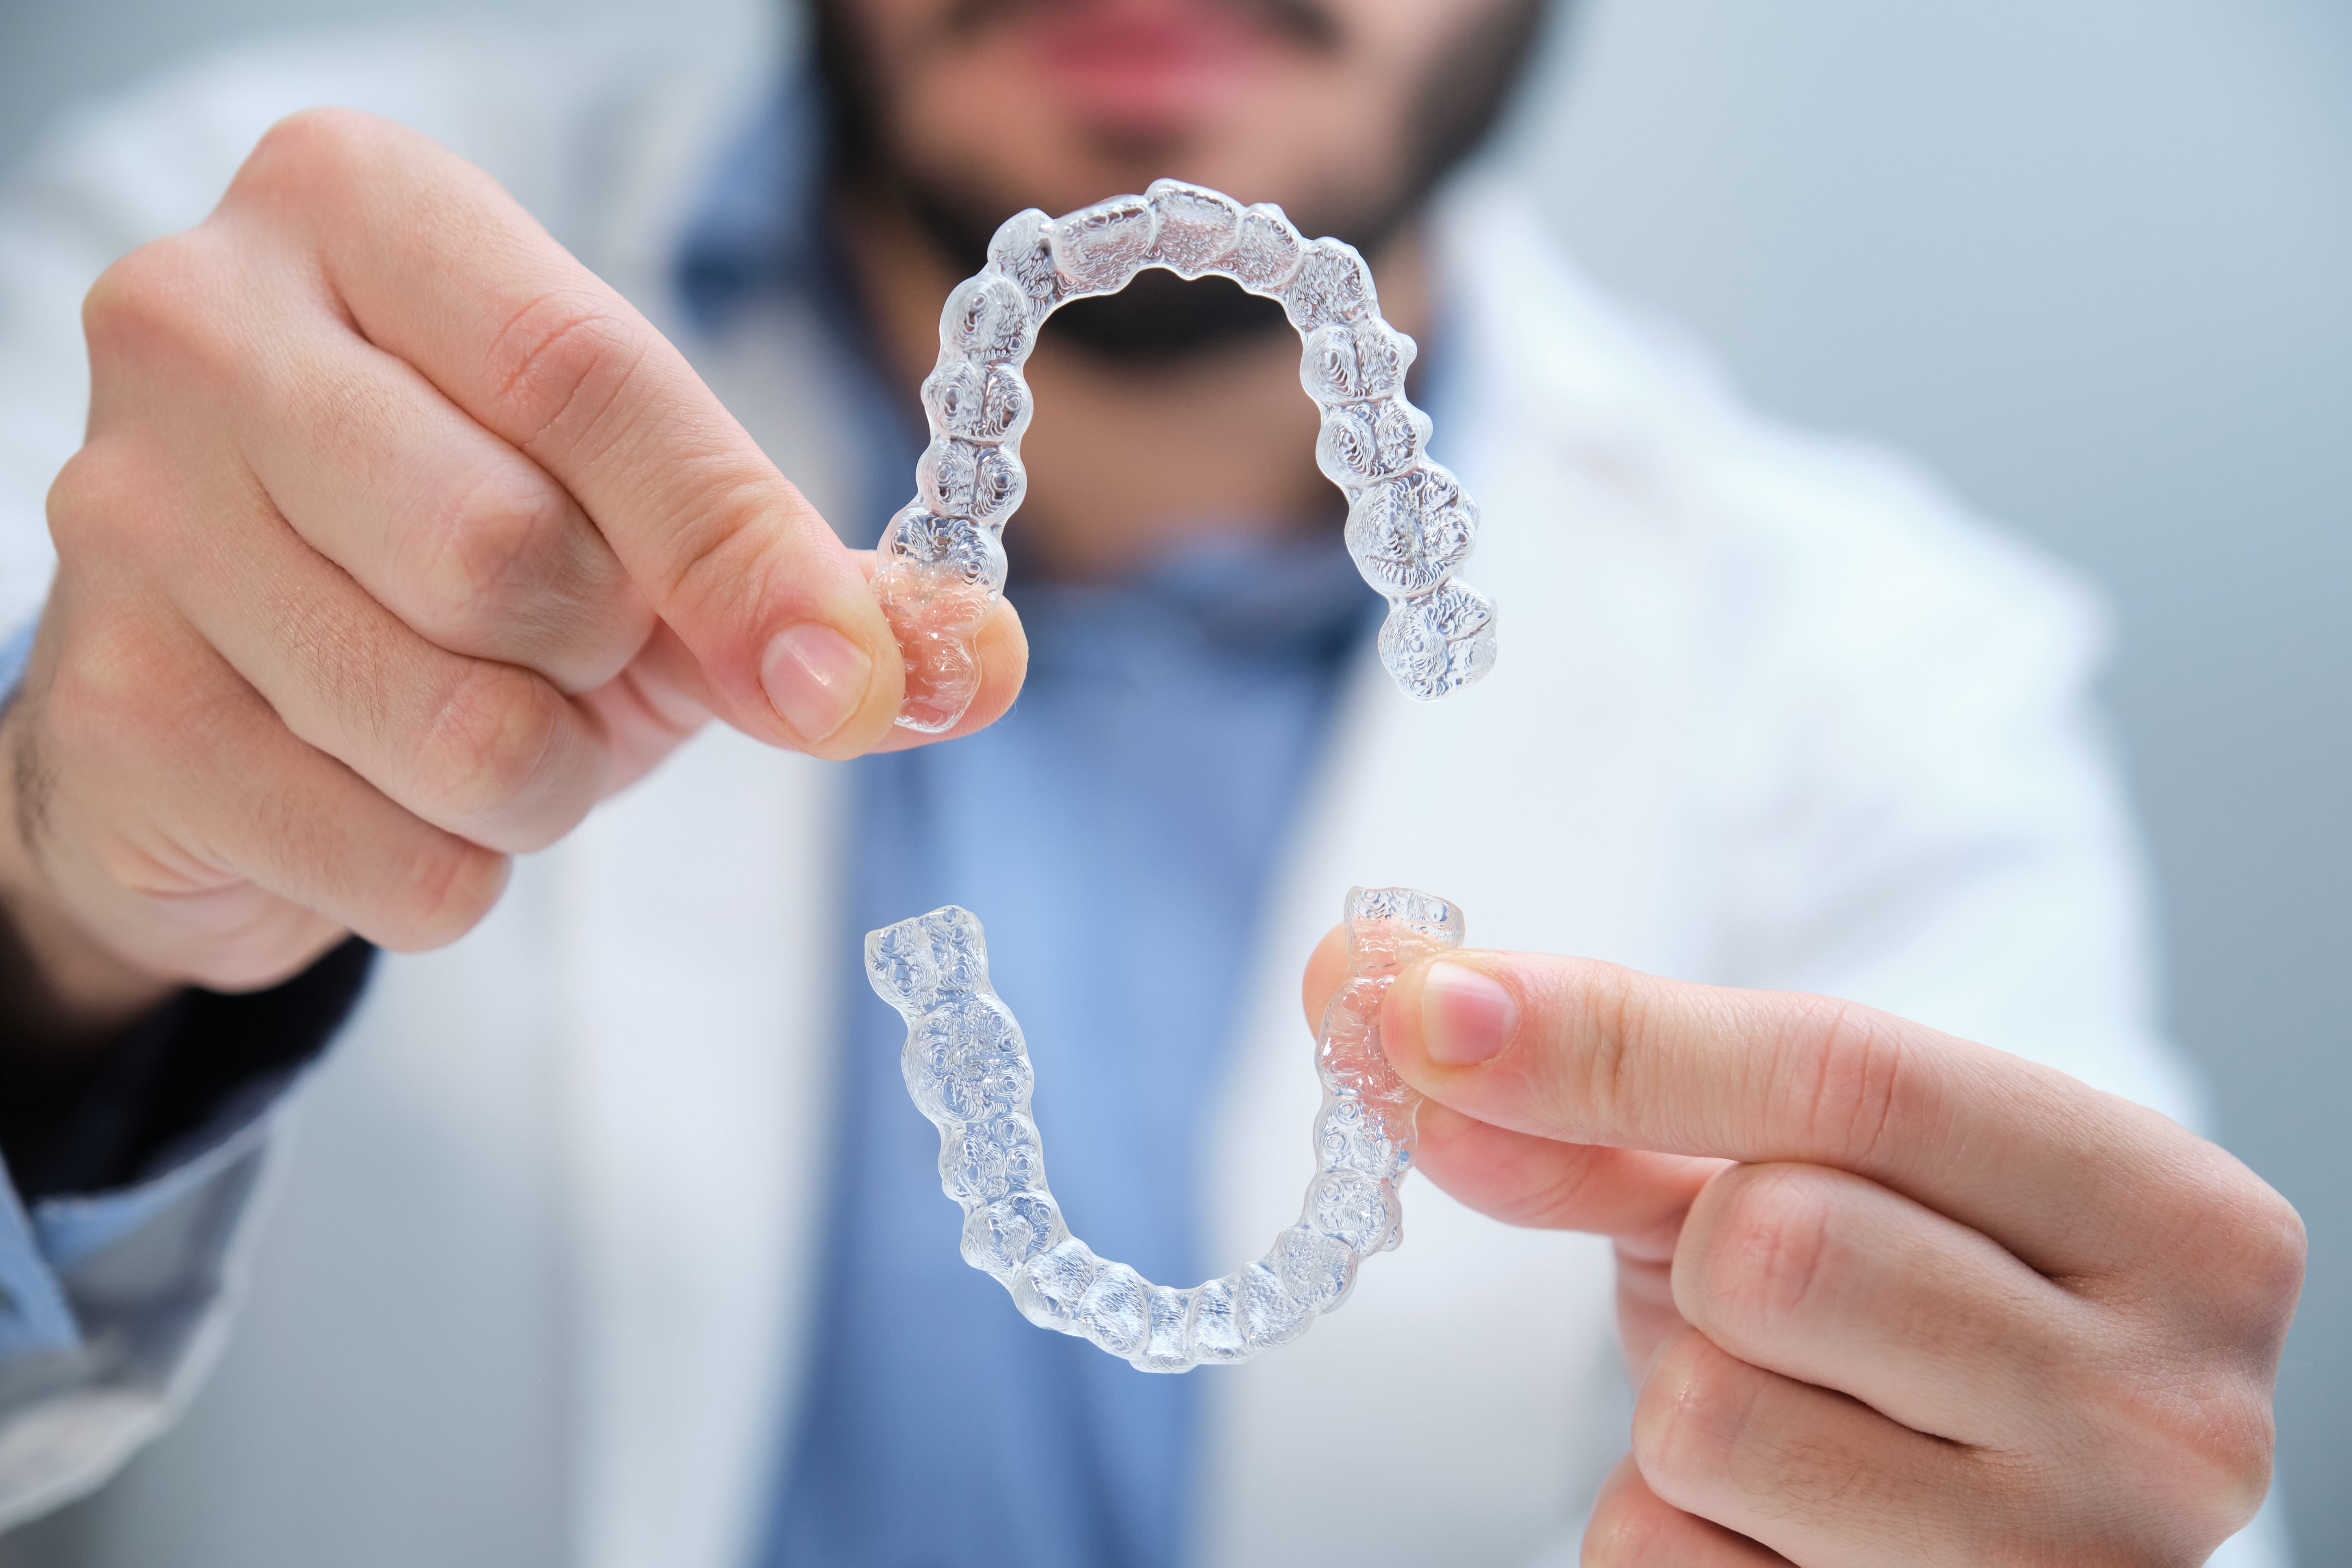 orthodontist holding clear aligners